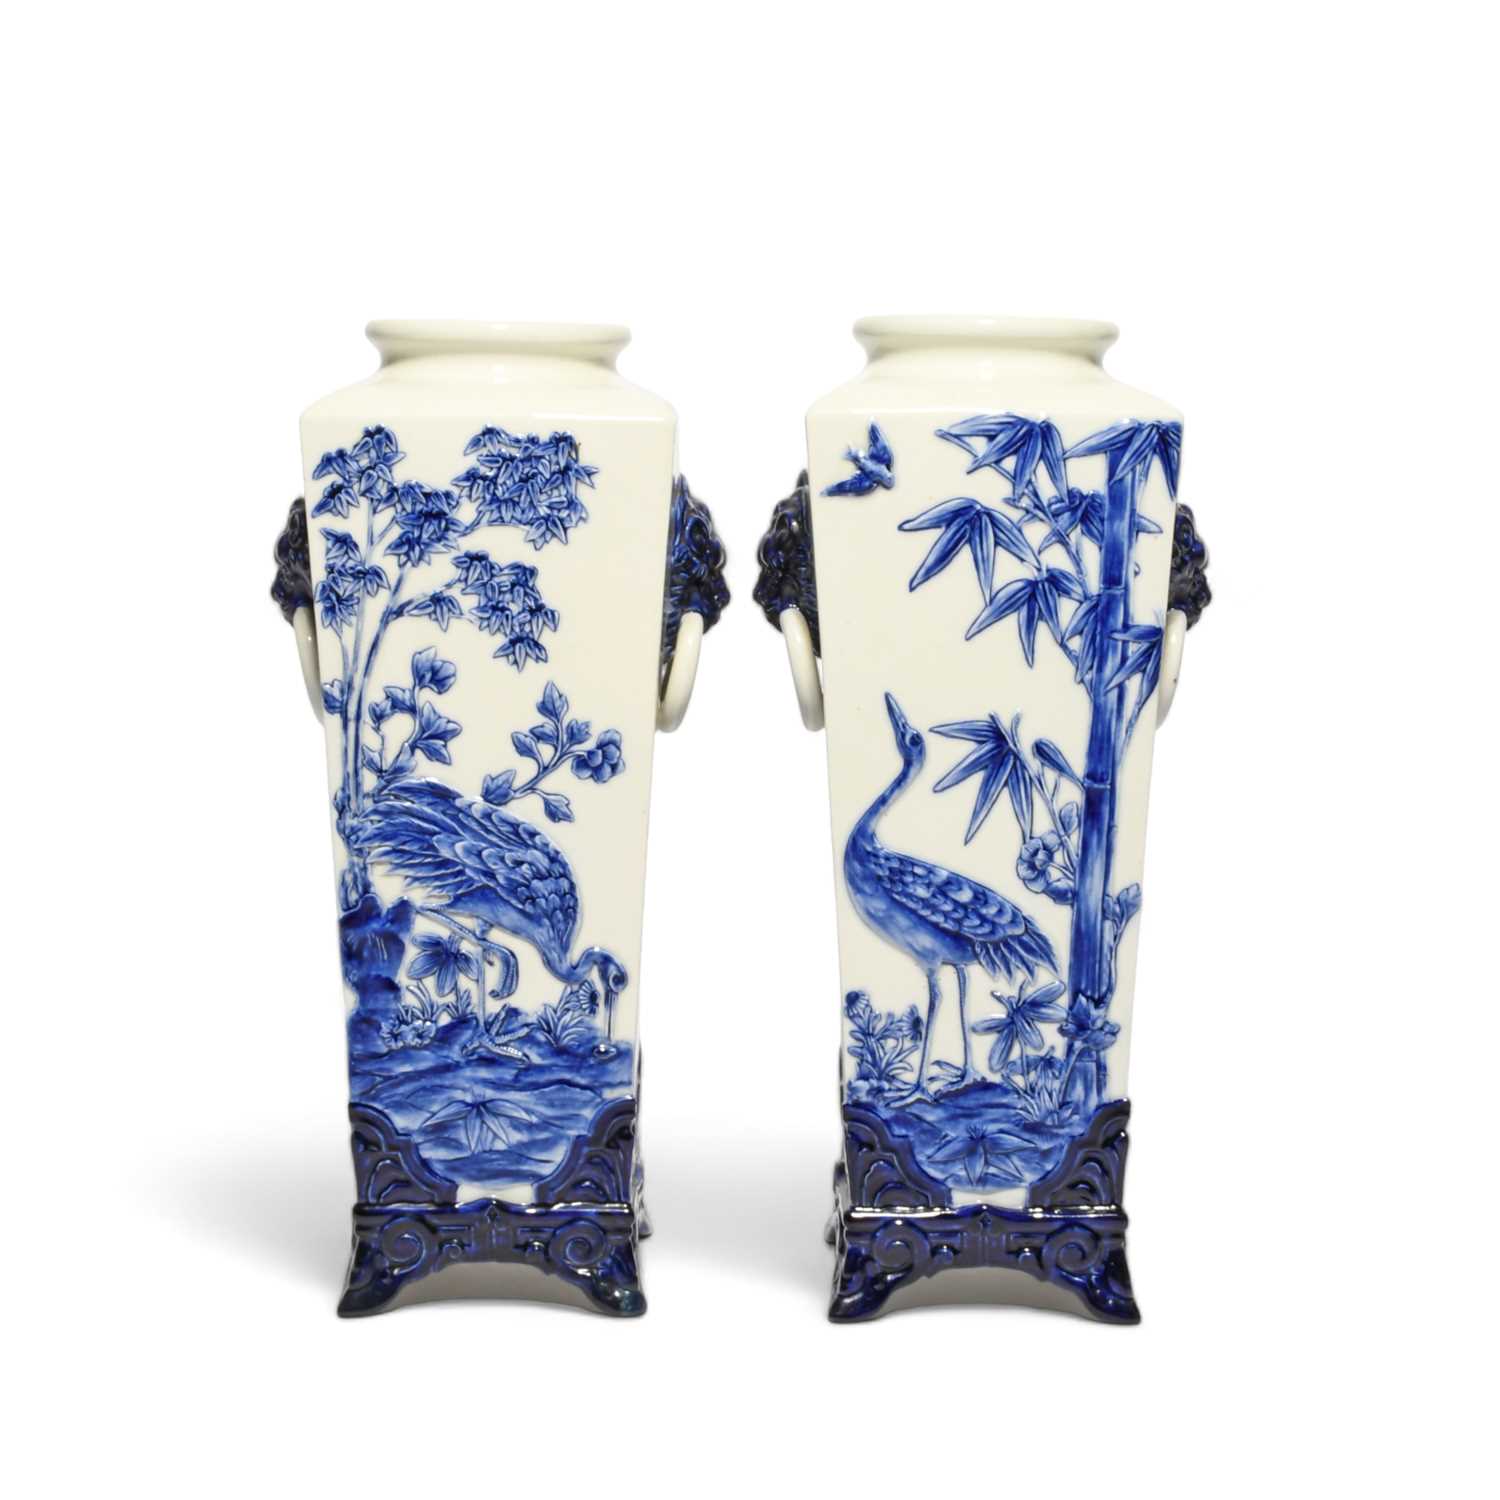 A pair of Royal Worcester Aesthetic Movement 'Japonism' vases, c.1870, the square forms moulded in - Image 2 of 4